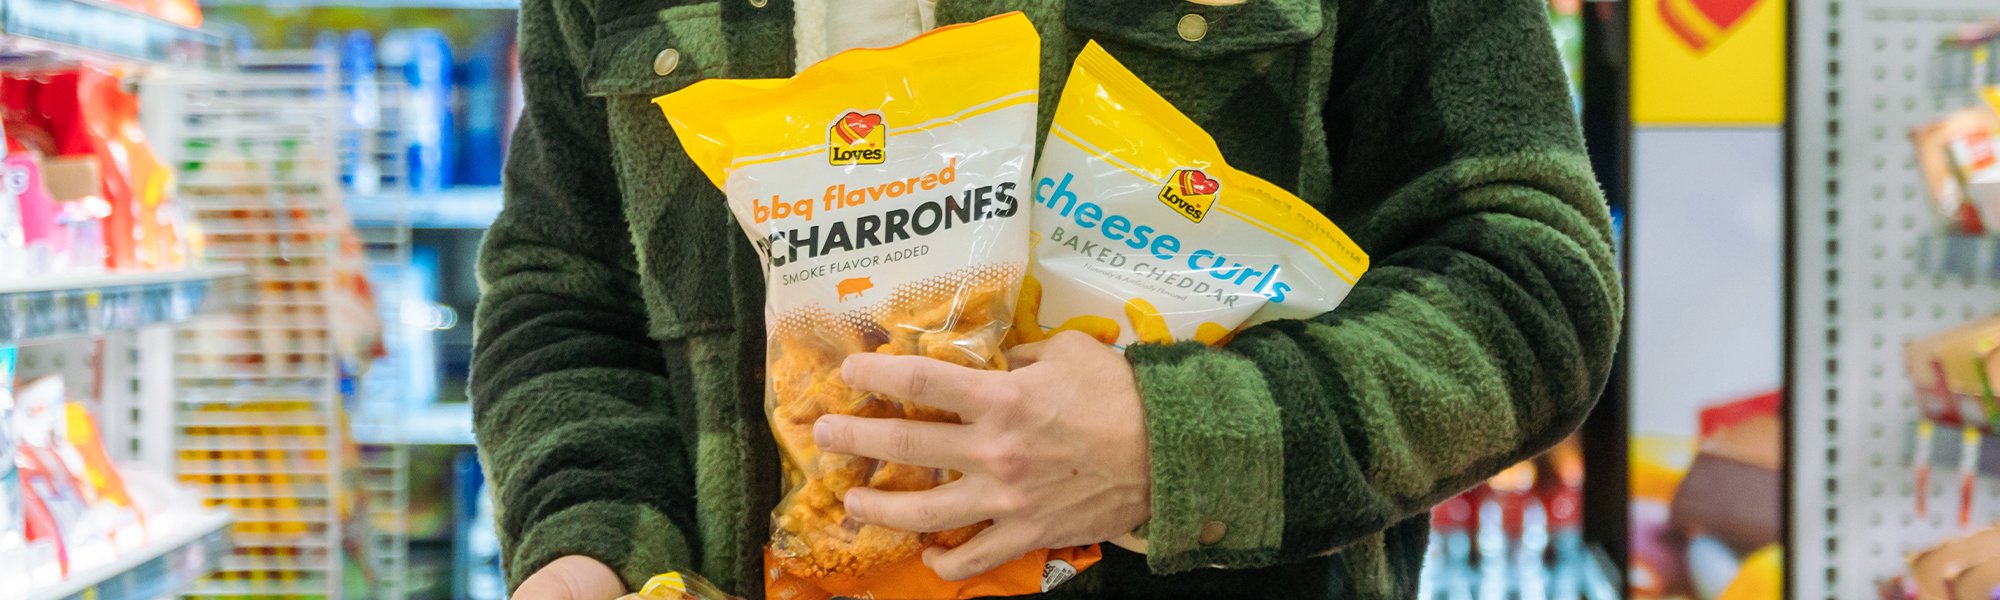 Love's Chicharrones and cheese curl chips